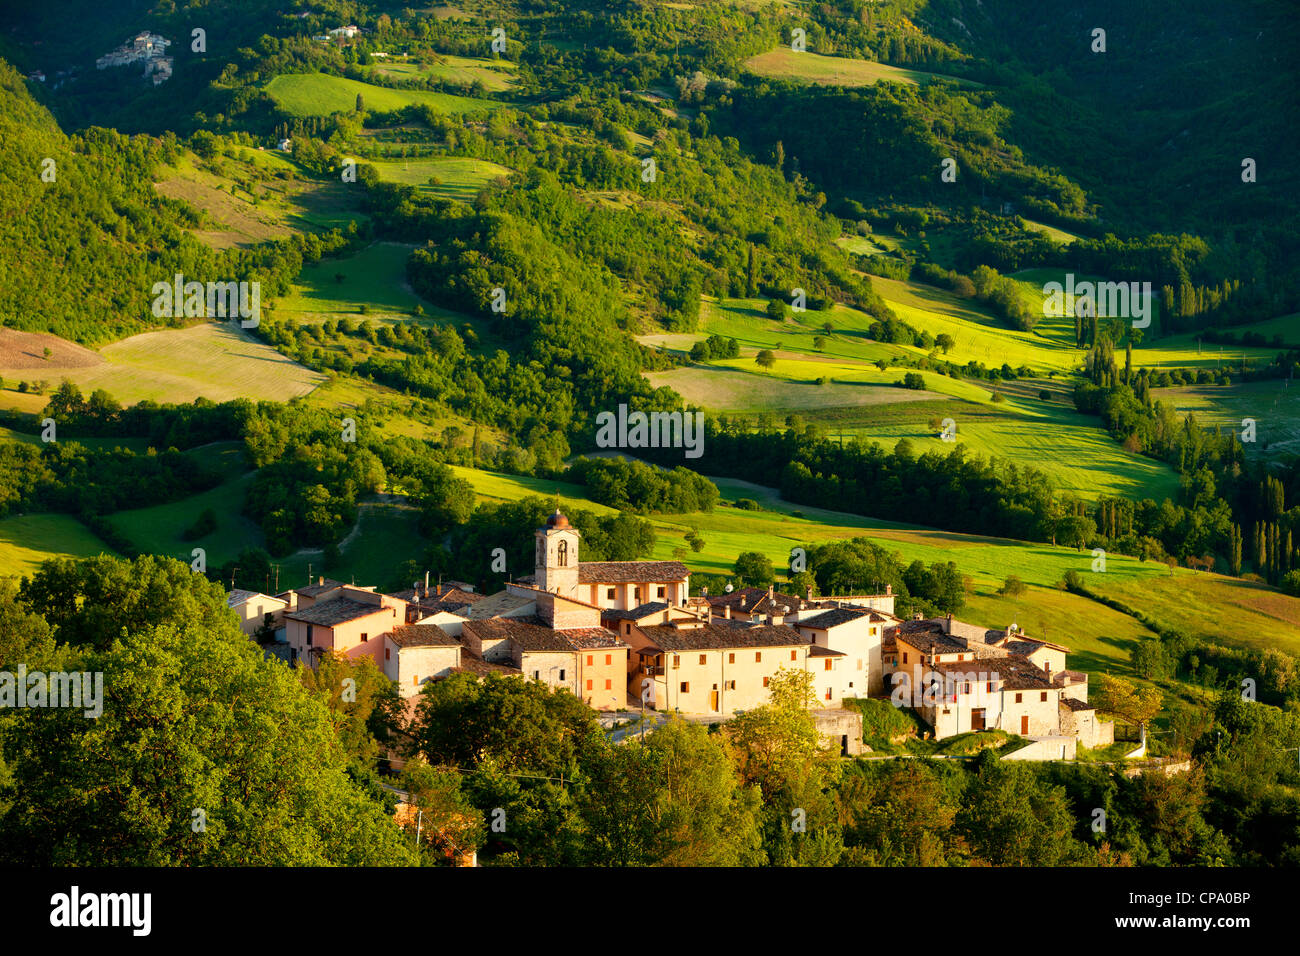 The medieval town of Castelvecchio in the Valnerina, Umbria Italy Stock Photo